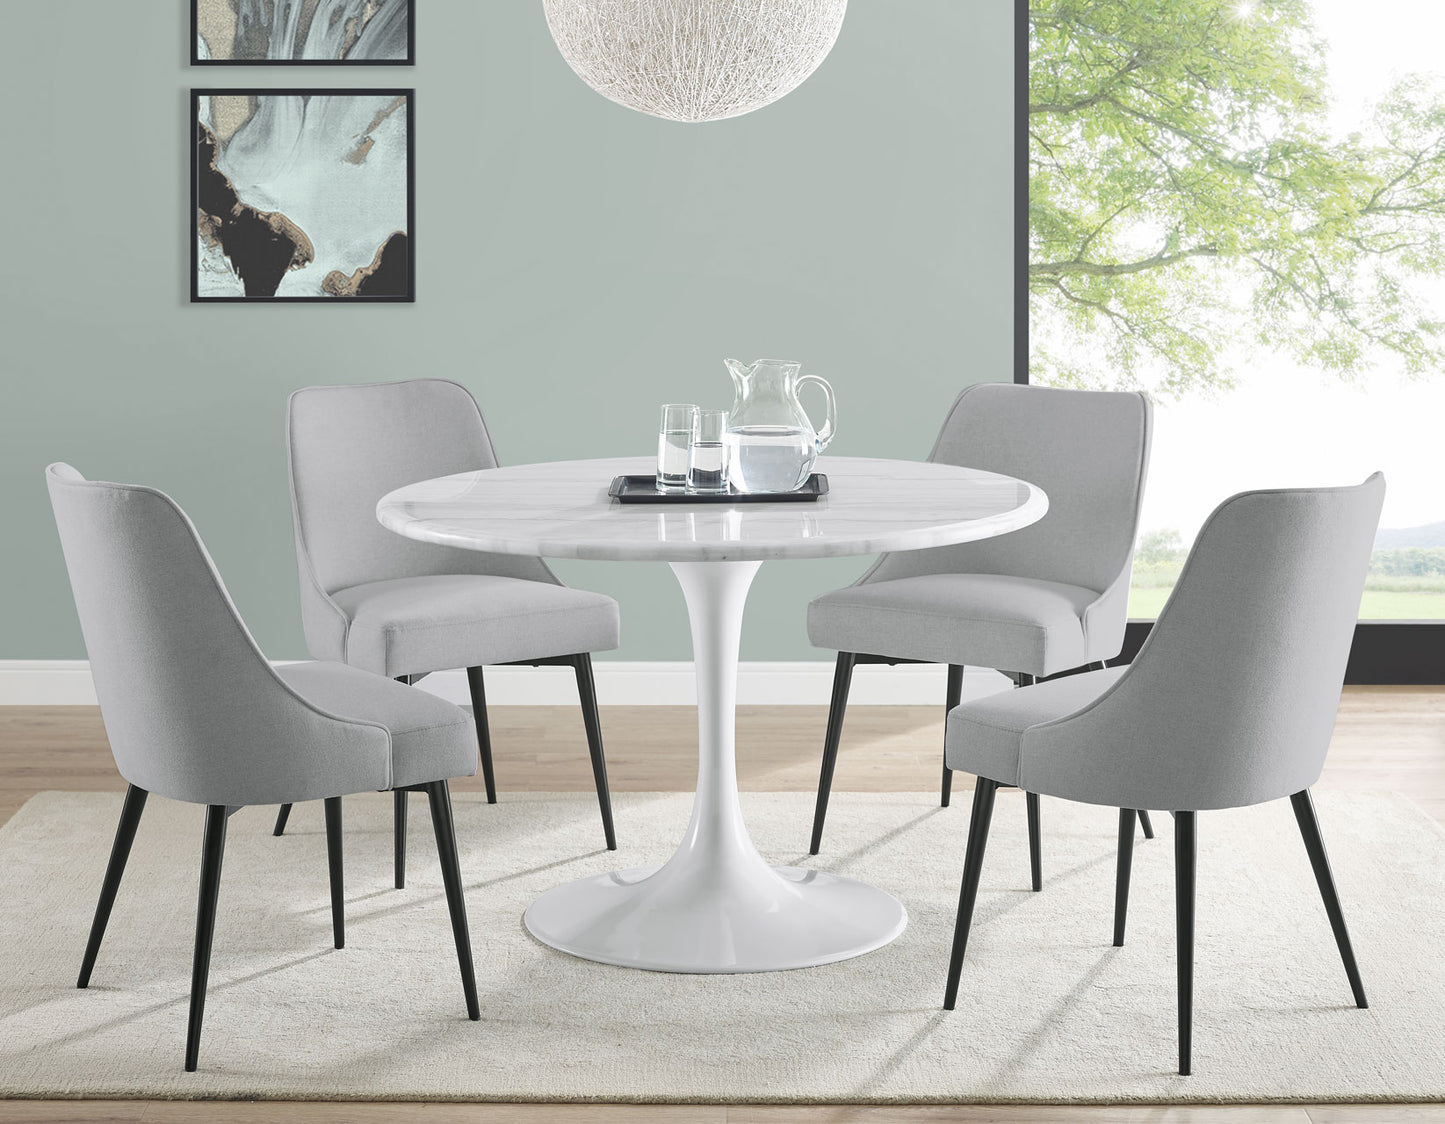 Colfax Marble Dining Group
(Build Your Own)